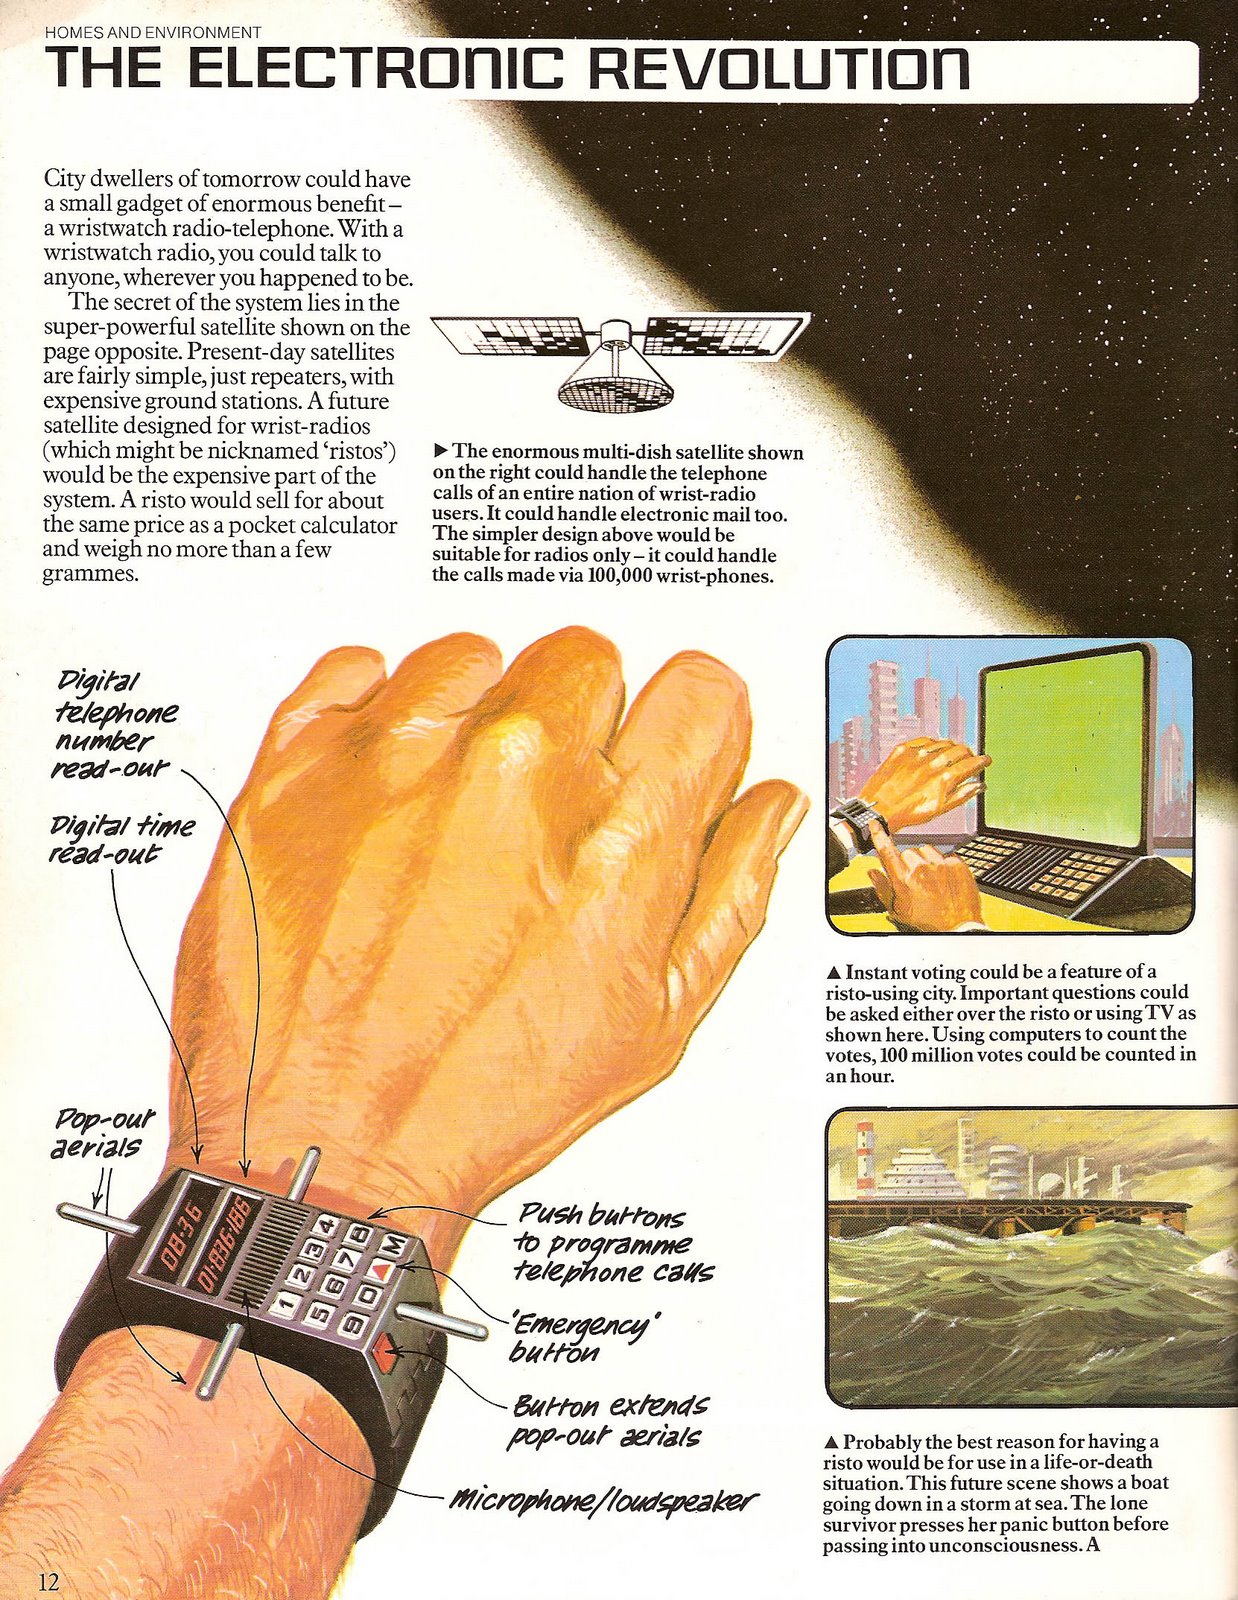 Smart Watches: a 118 year old dream